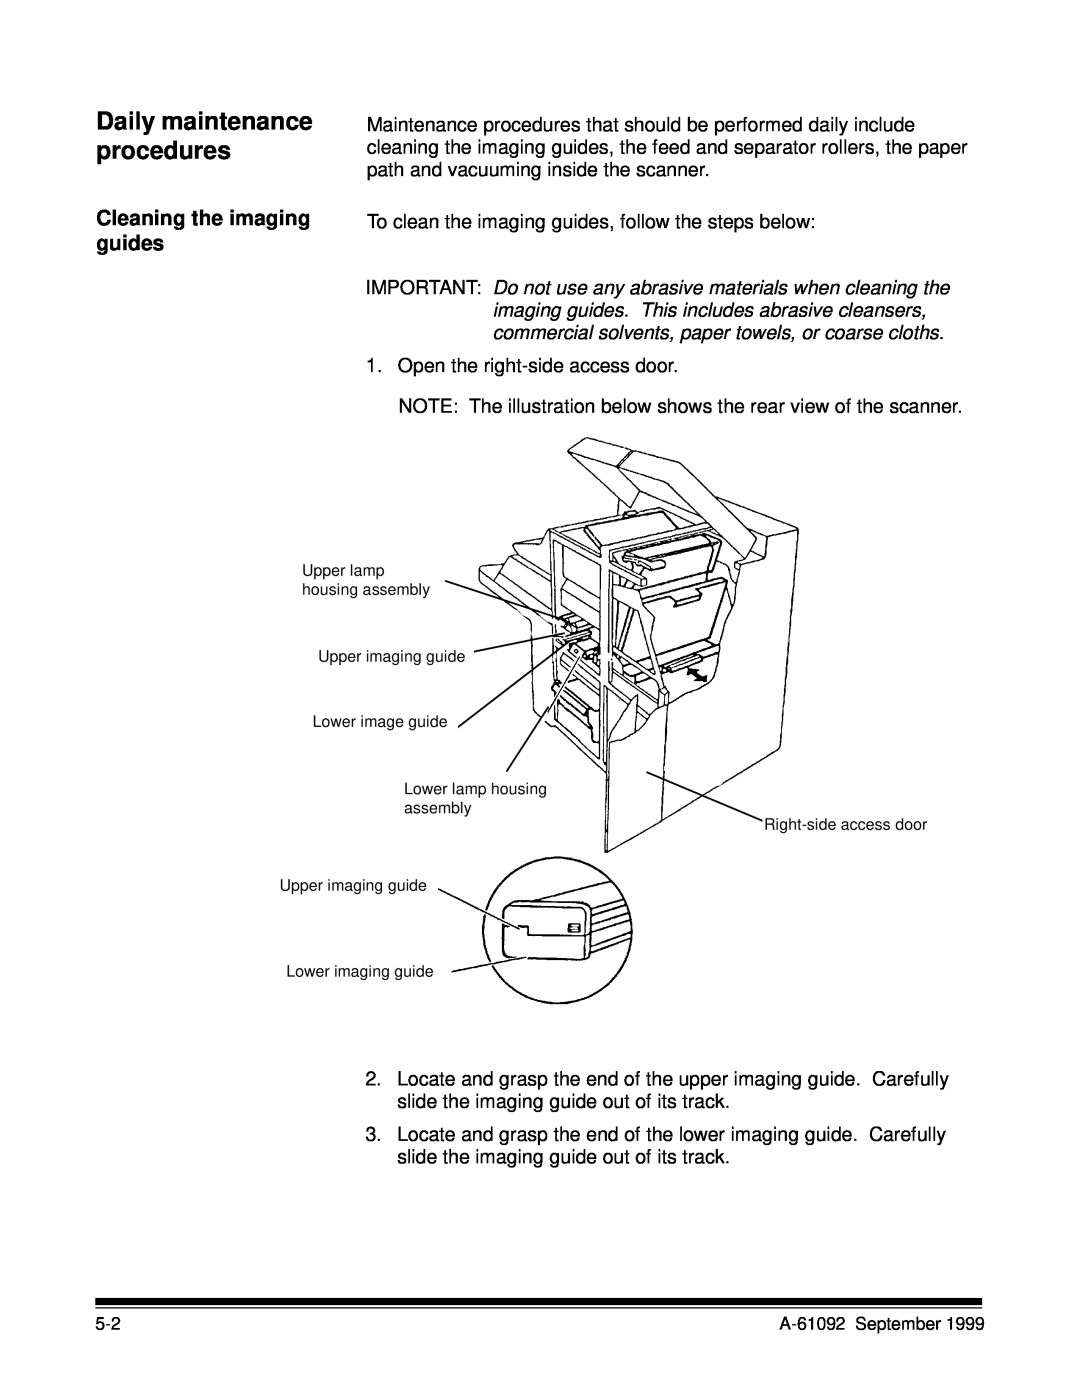 Kodak A-61092 manual Daily maintenance procedures, Cleaning the imaging guides 